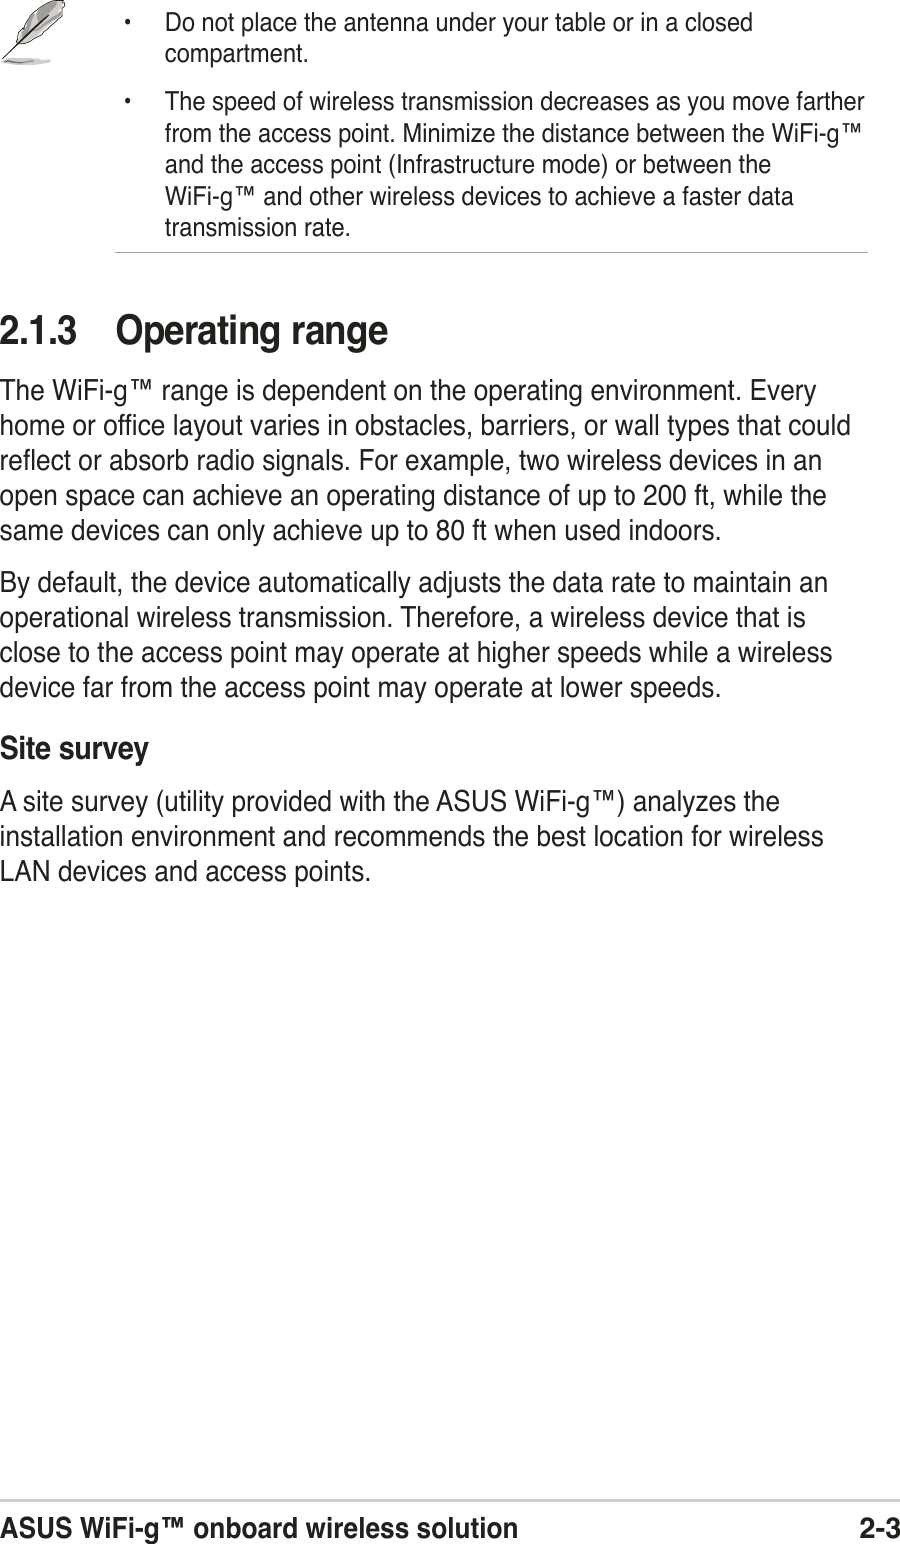 ASUS WiFi-g™ onboard wireless solution2-32.1.3 Operating rangeThe WiFi-g™ range is dependent on the operating environment. Everyhome or office layout varies in obstacles, barriers, or wall types that couldreflect or absorb radio signals. For example, two wireless devices in anopen space can achieve an operating distance of up to 200 ft, while thesame devices can only achieve up to 80 ft when used indoors.By default, the device automatically adjusts the data rate to maintain anoperational wireless transmission. Therefore, a wireless device that isclose to the access point may operate at higher speeds while a wirelessdevice far from the access point may operate at lower speeds.Site surveyA site survey (utility provided with the ASUS WiFi-g™) analyzes theinstallation environment and recommends the best location for wirelessLAN devices and access points.• Do not place the antenna under your table or in a closedcompartment.• The speed of wireless transmission decreases as you move fartherfrom the access point. Minimize the distance between the WiFi-g™and the access point (Infrastructure mode) or between theWiFi-g™ and other wireless devices to achieve a faster datatransmission rate.